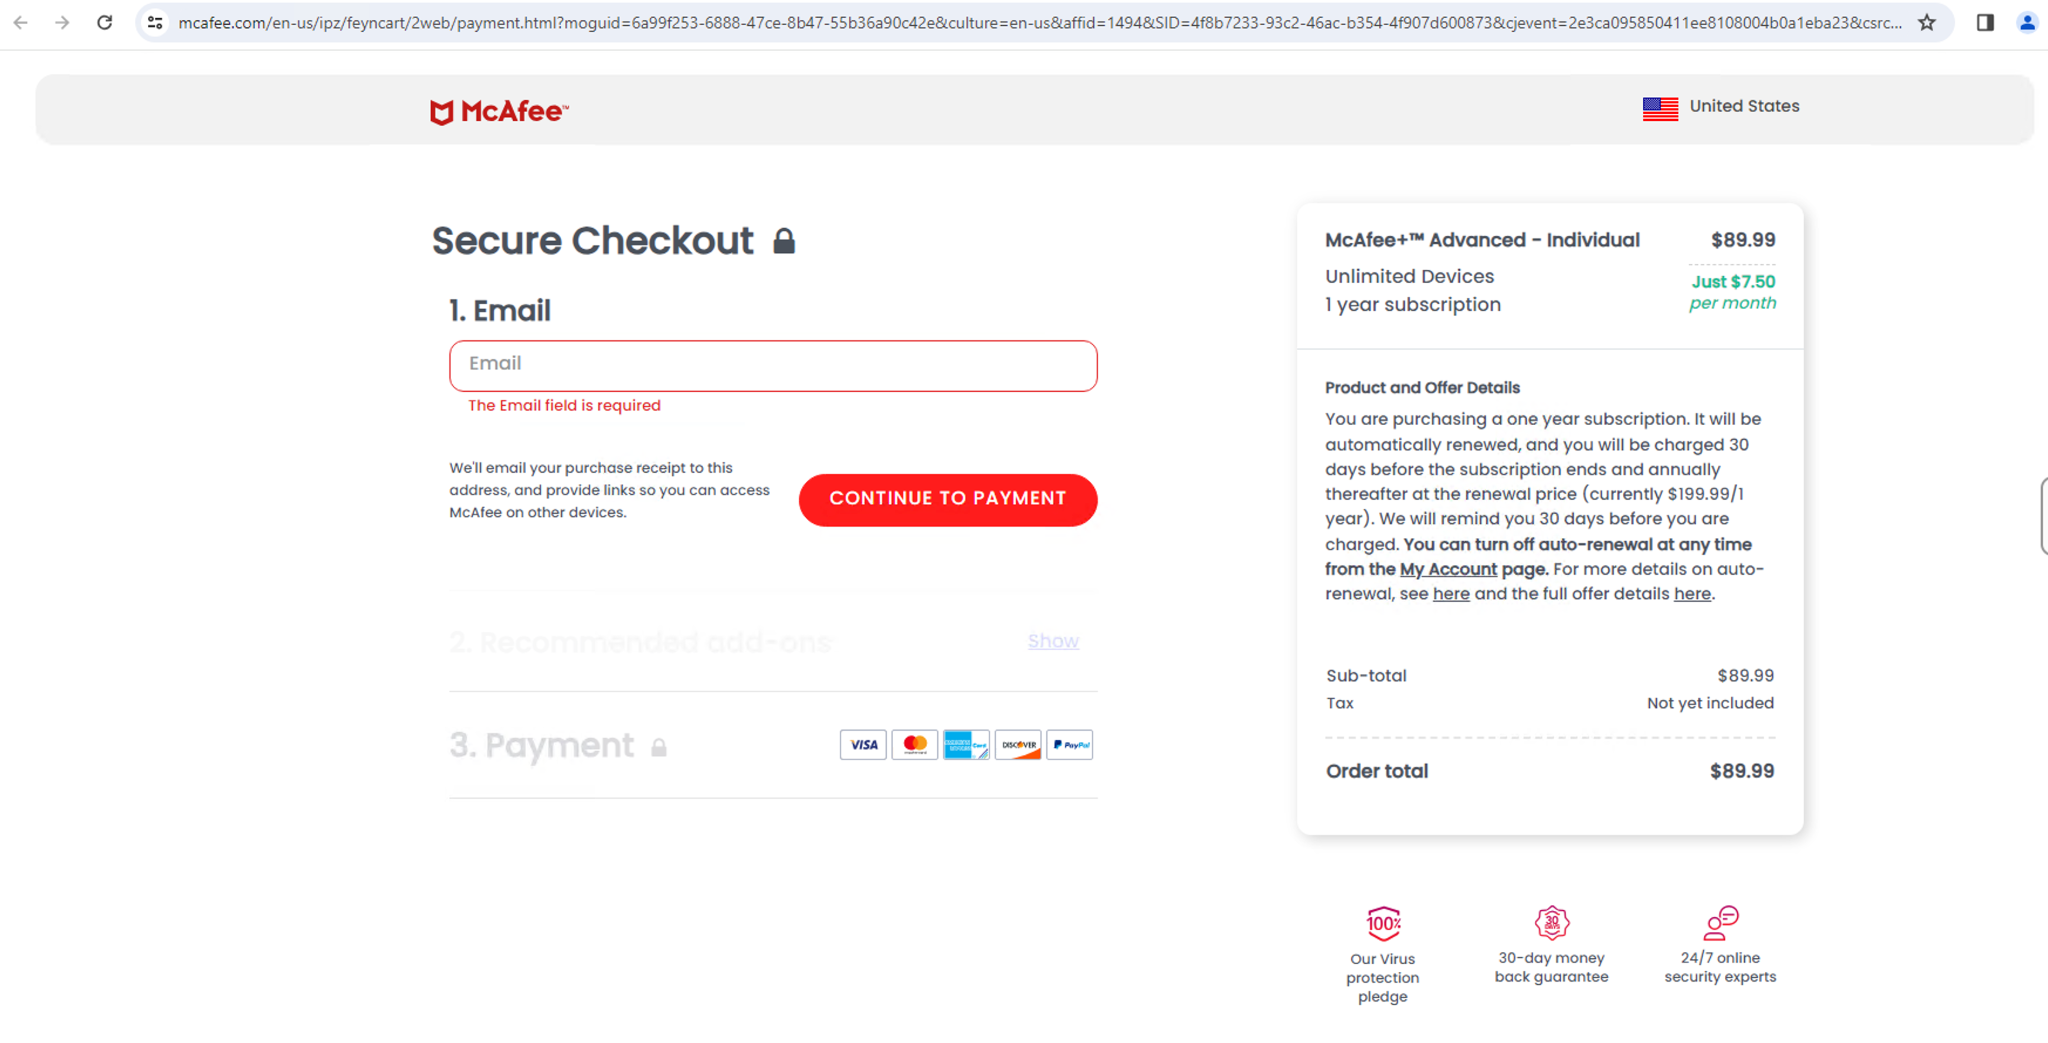 Image 12 is a screenshot of the McAfee website Secure Checkout page asking the end user to input their email. A security subscription is listed in the shopping cart. 